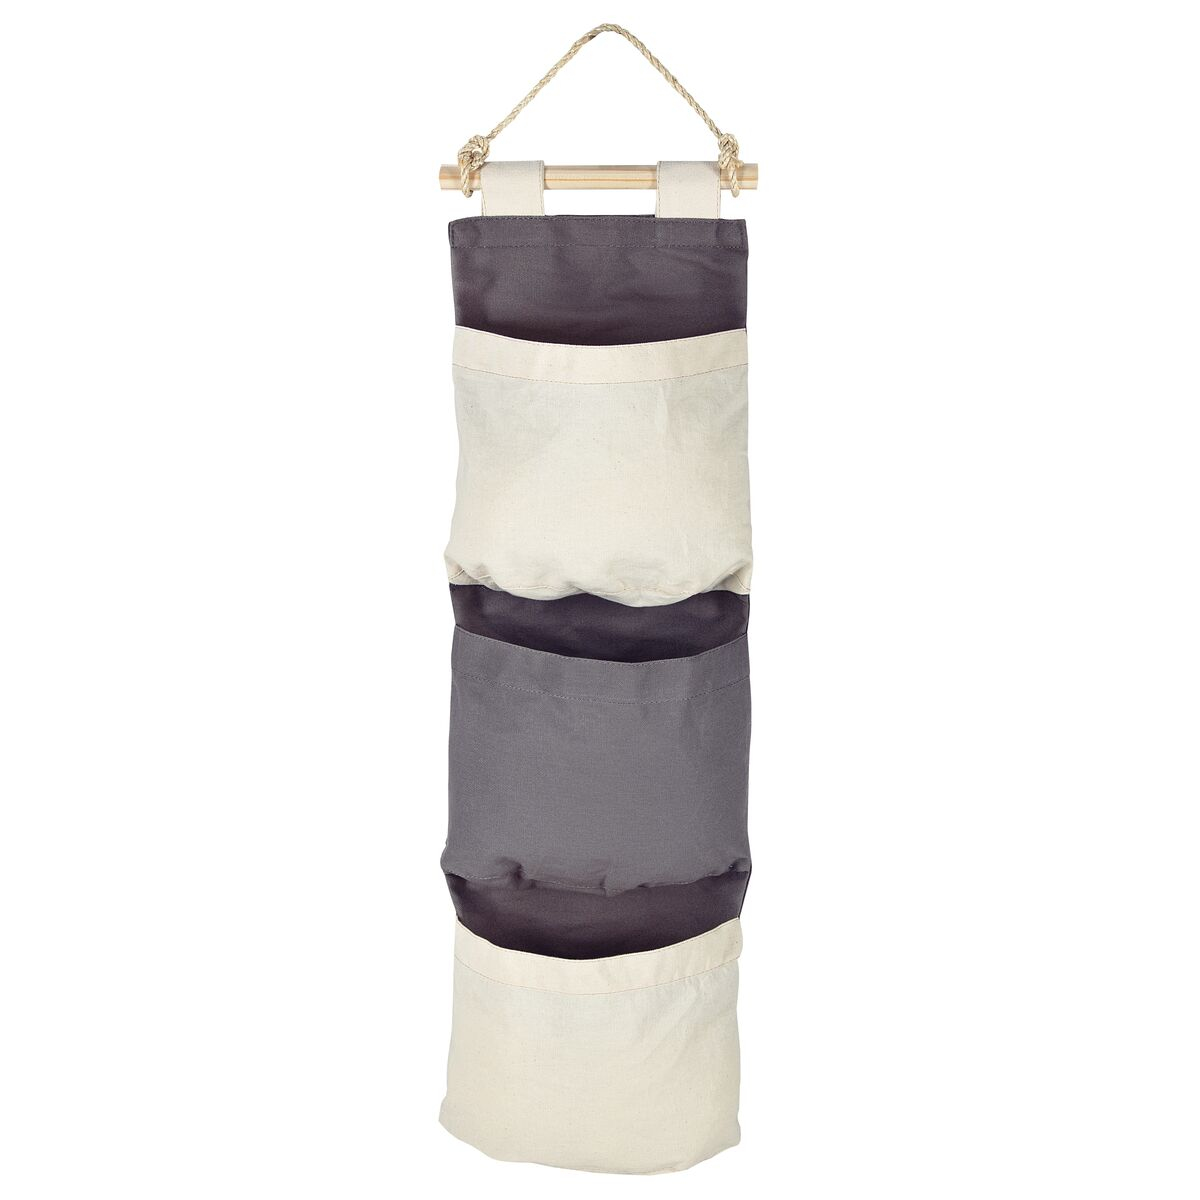 
Tramontina Organizer in Canvas with 3 Pockets and Rope for Hanging
